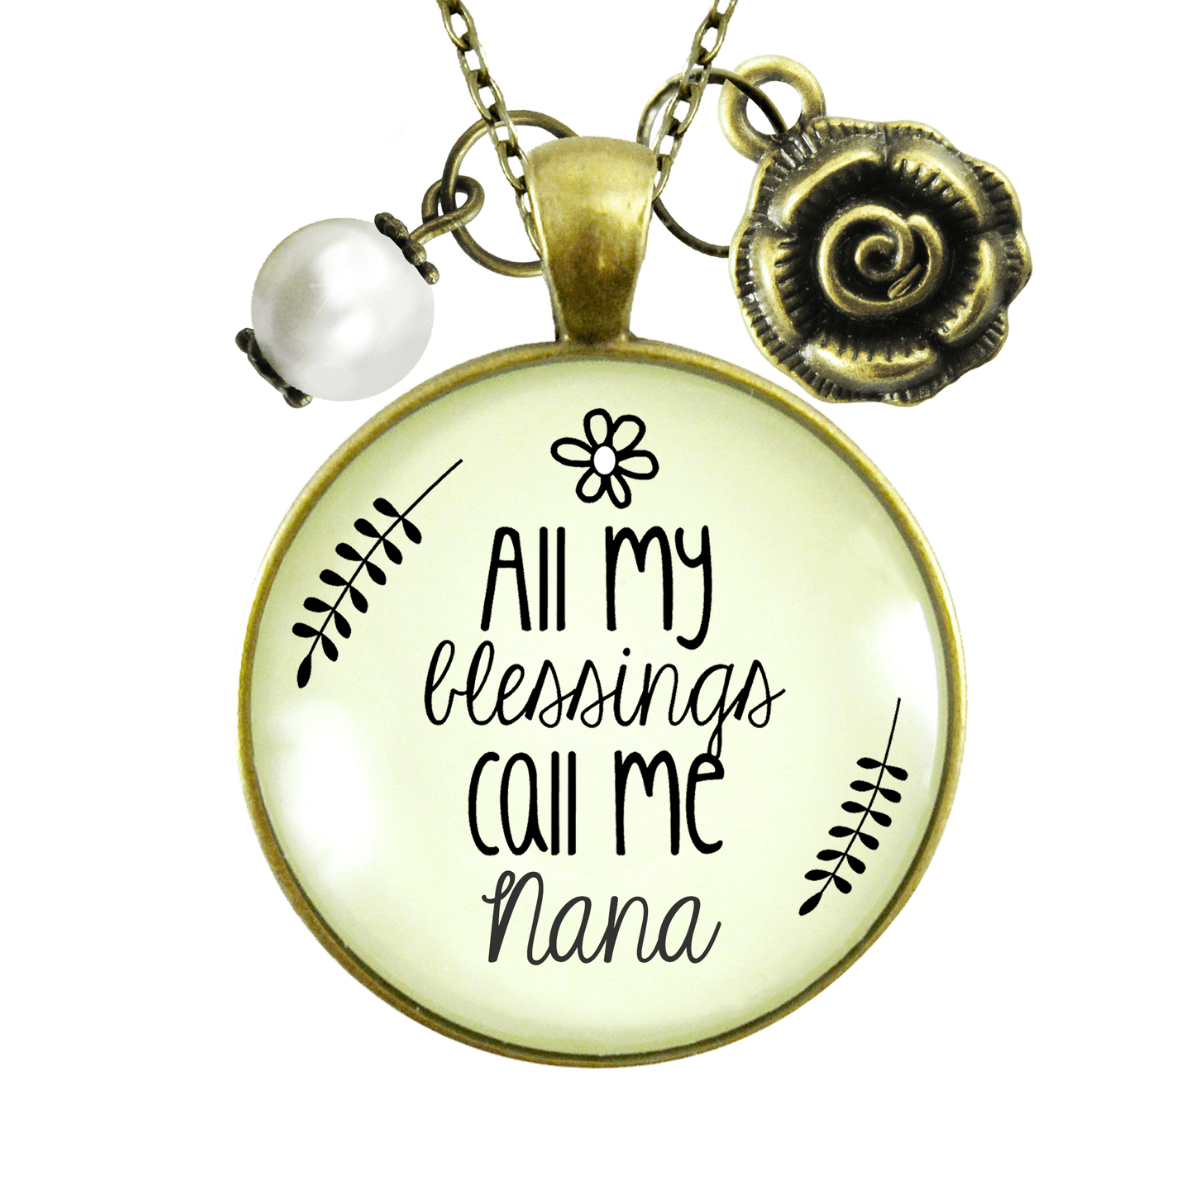 Gutsy Goodness Nana Necklace All My Blessing Gift Quote Womens Grandma Jewelry - Gutsy Goodness Handmade Jewelry;Nana Necklace All My Blessing Gift Quote Womens Grandma Jewelry - Gutsy Goodness Handmade Jewelry Gifts